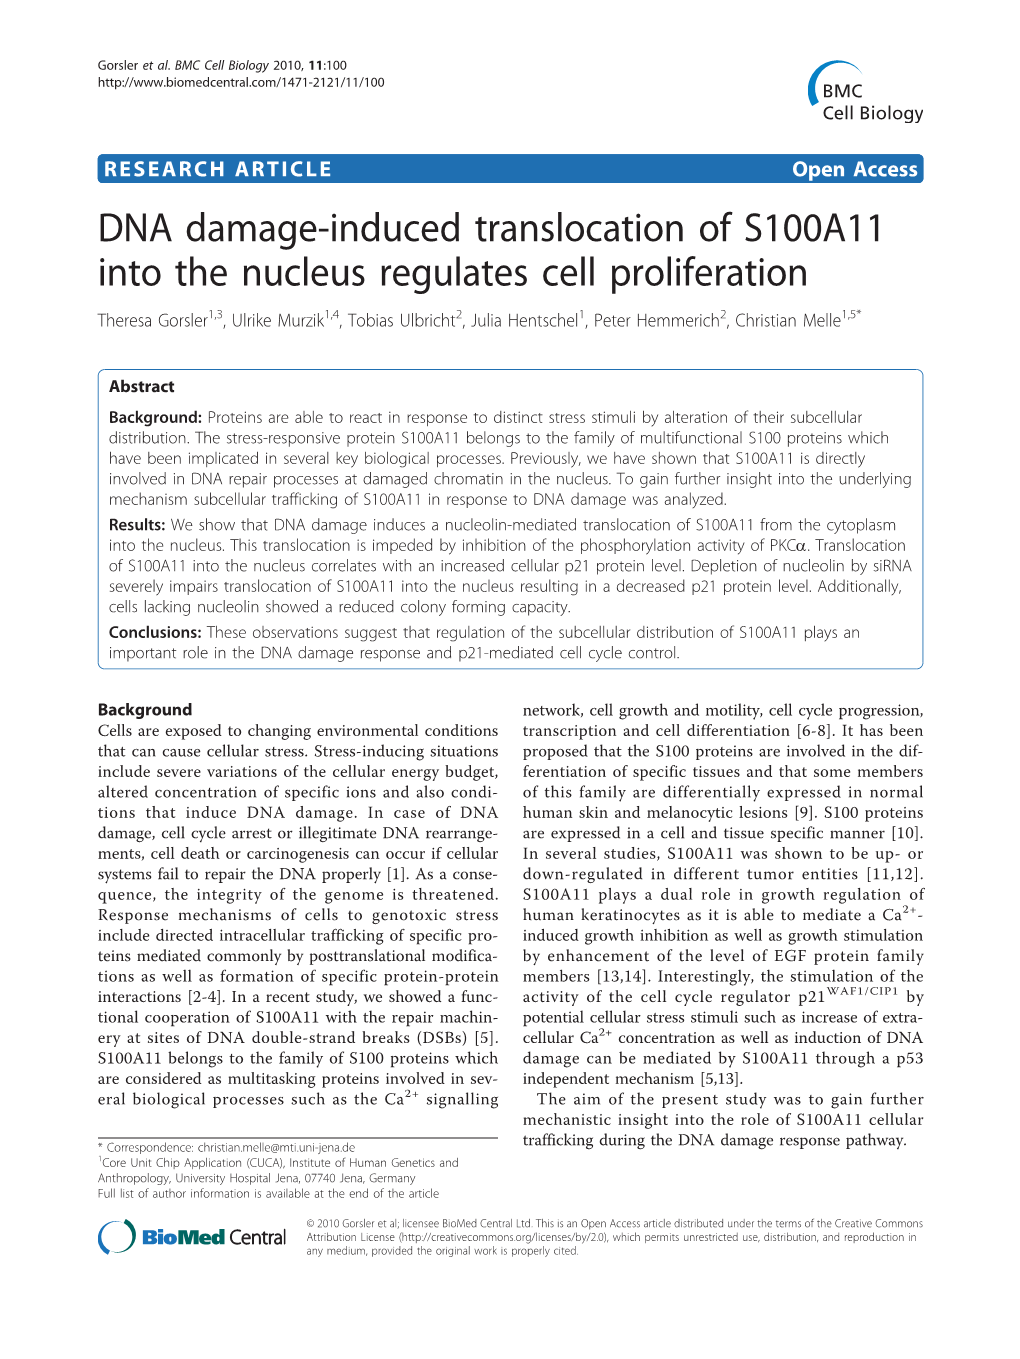 DNA Damage-Induced Translocation of S100A11 Into the Nucleus